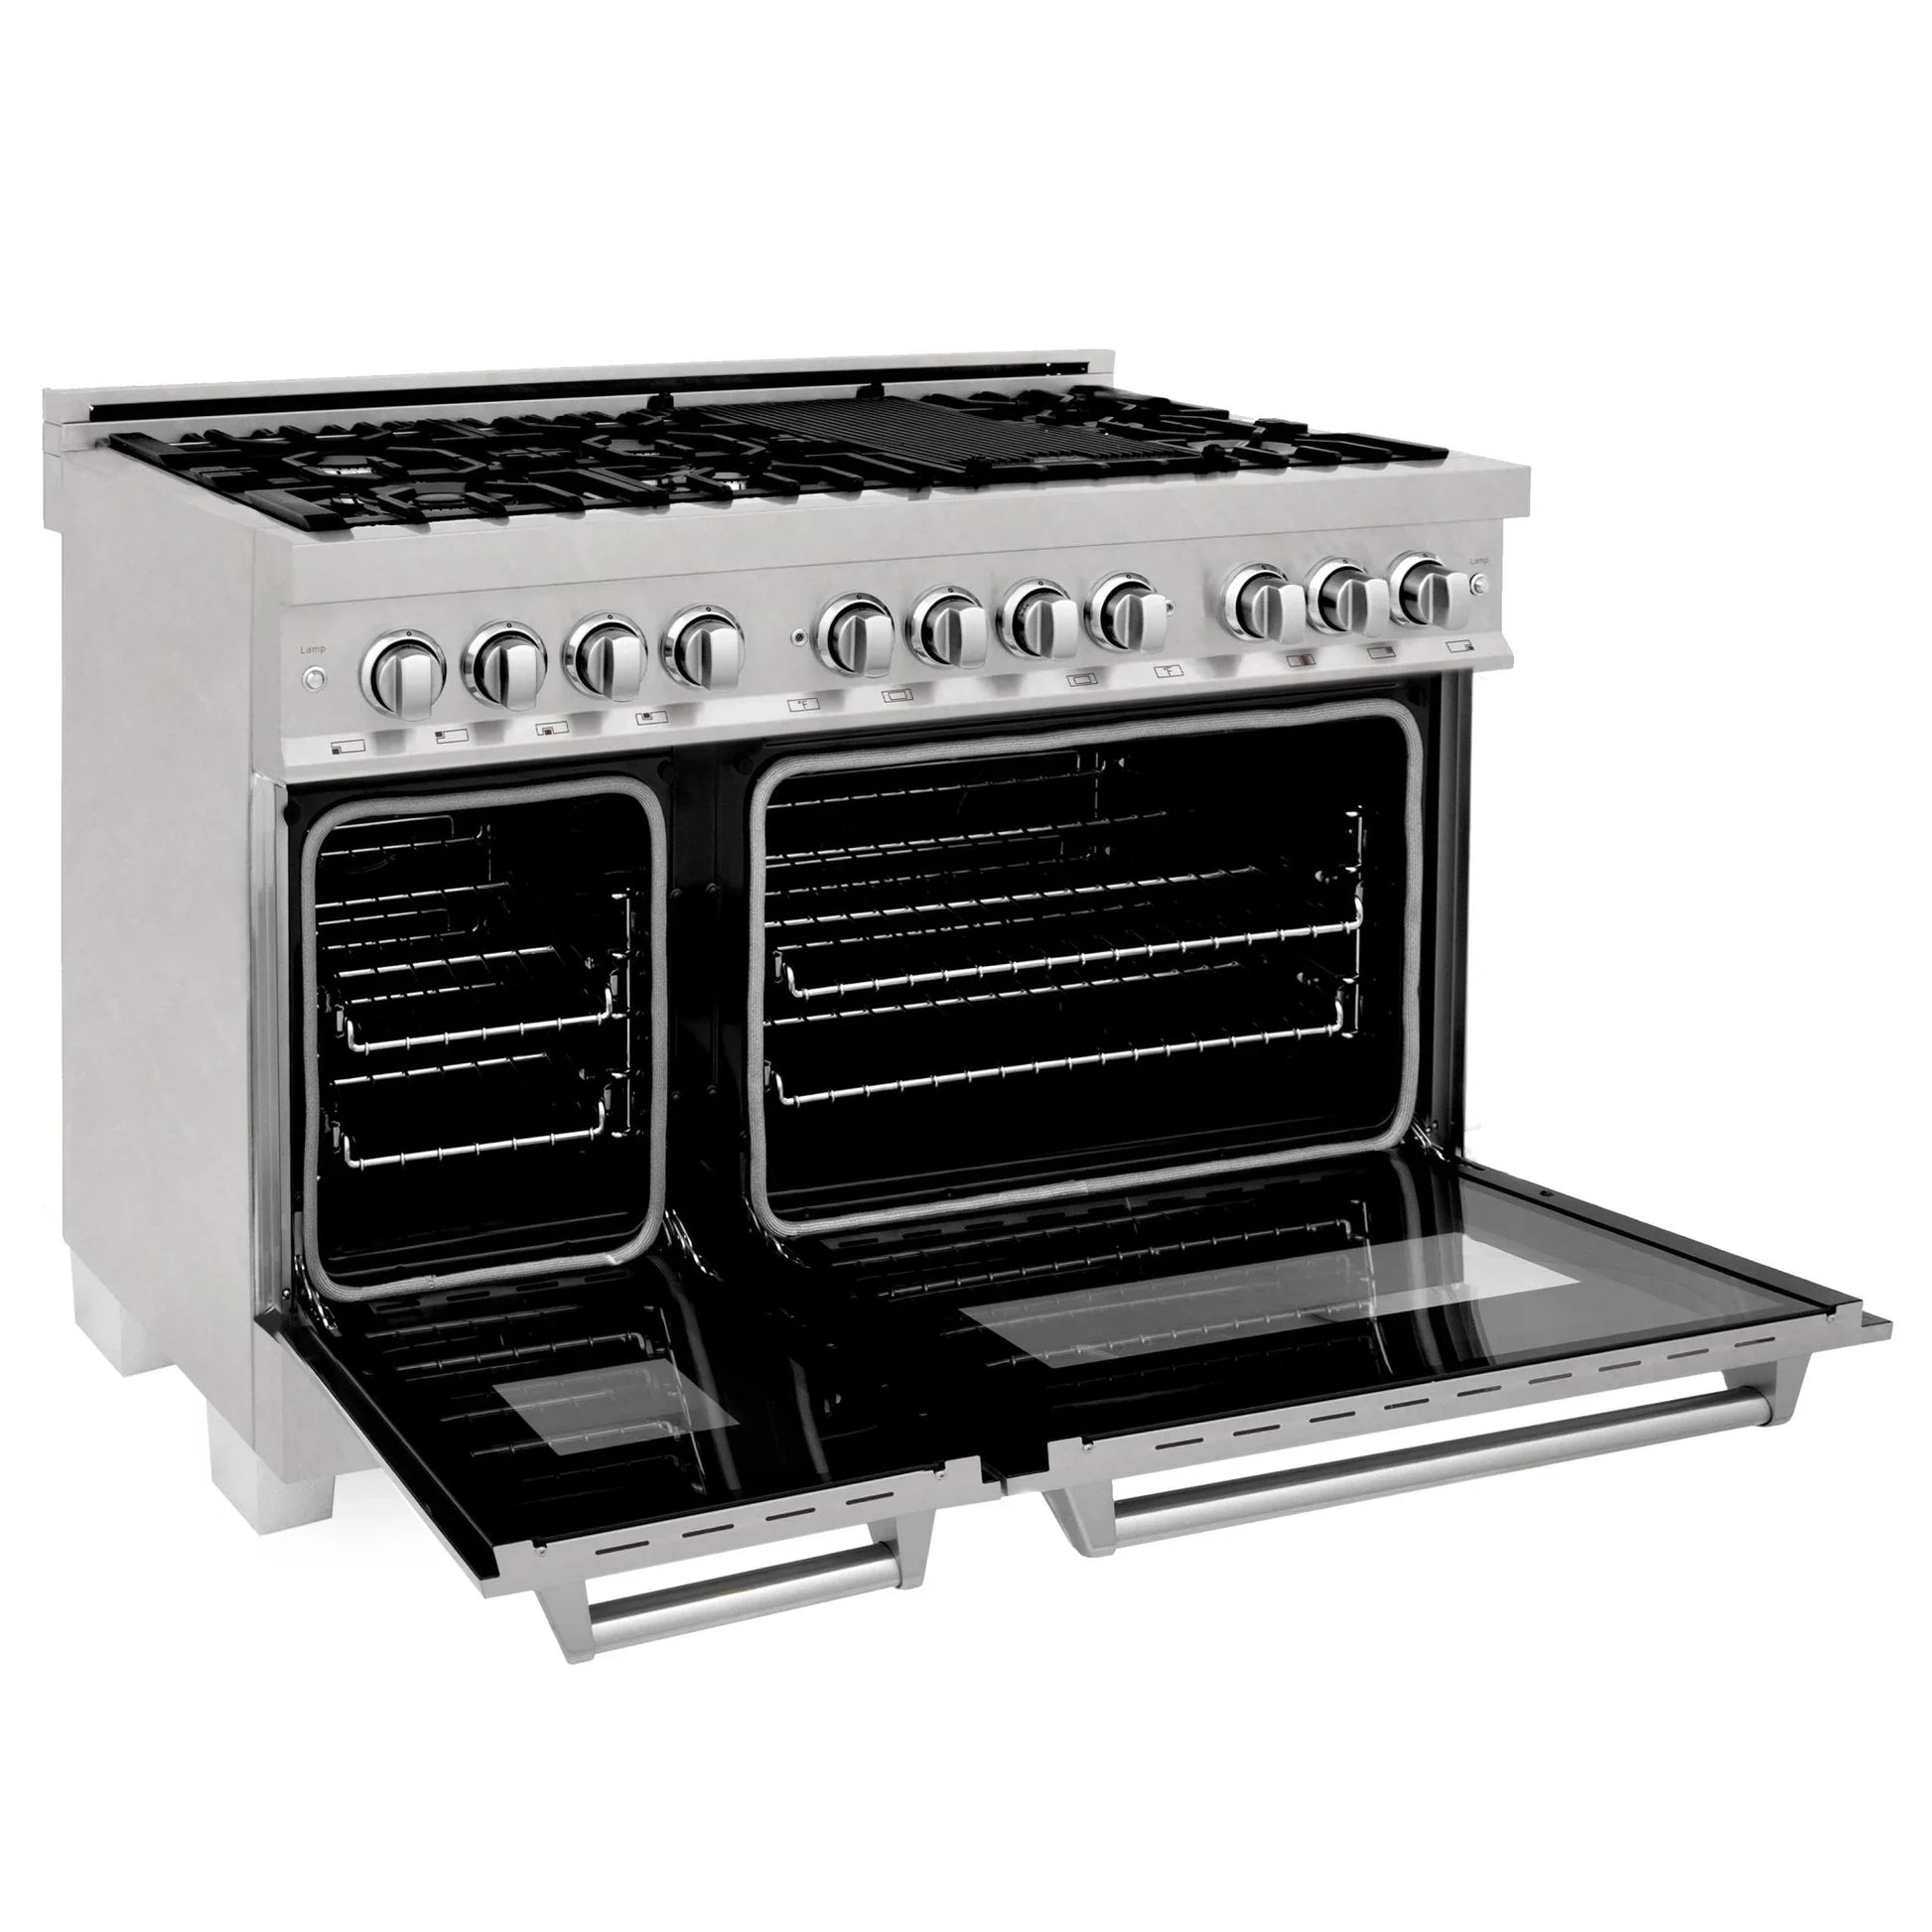 ZLINE 48" Dual Fuel Range with Gas Stove and Electric Oven - Fingerprint Resistant Stainless Steel